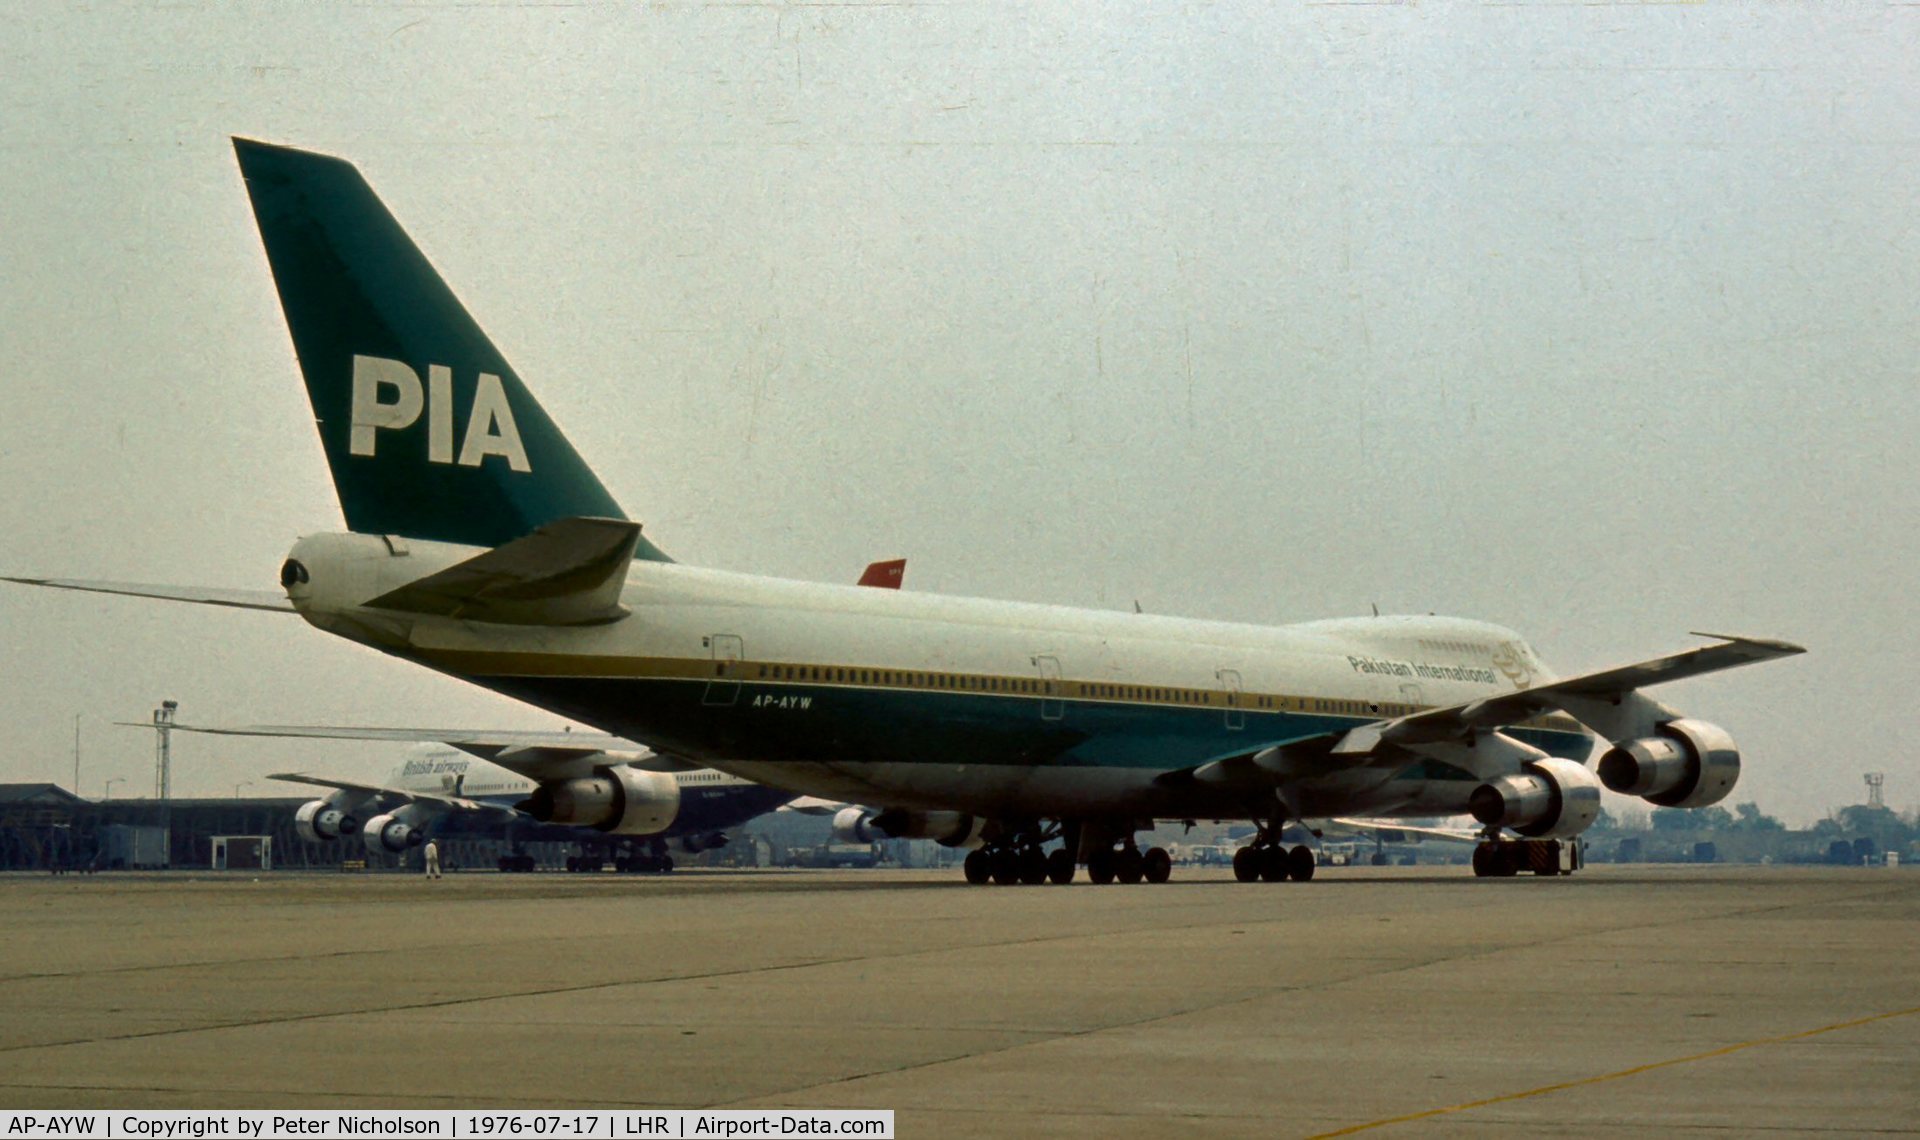 AP-AYW, 1975 Boeing 747-282B C/N 21035, In service with Pakistan International Airlines as seen at London Heathrow in the Summer of 1976.